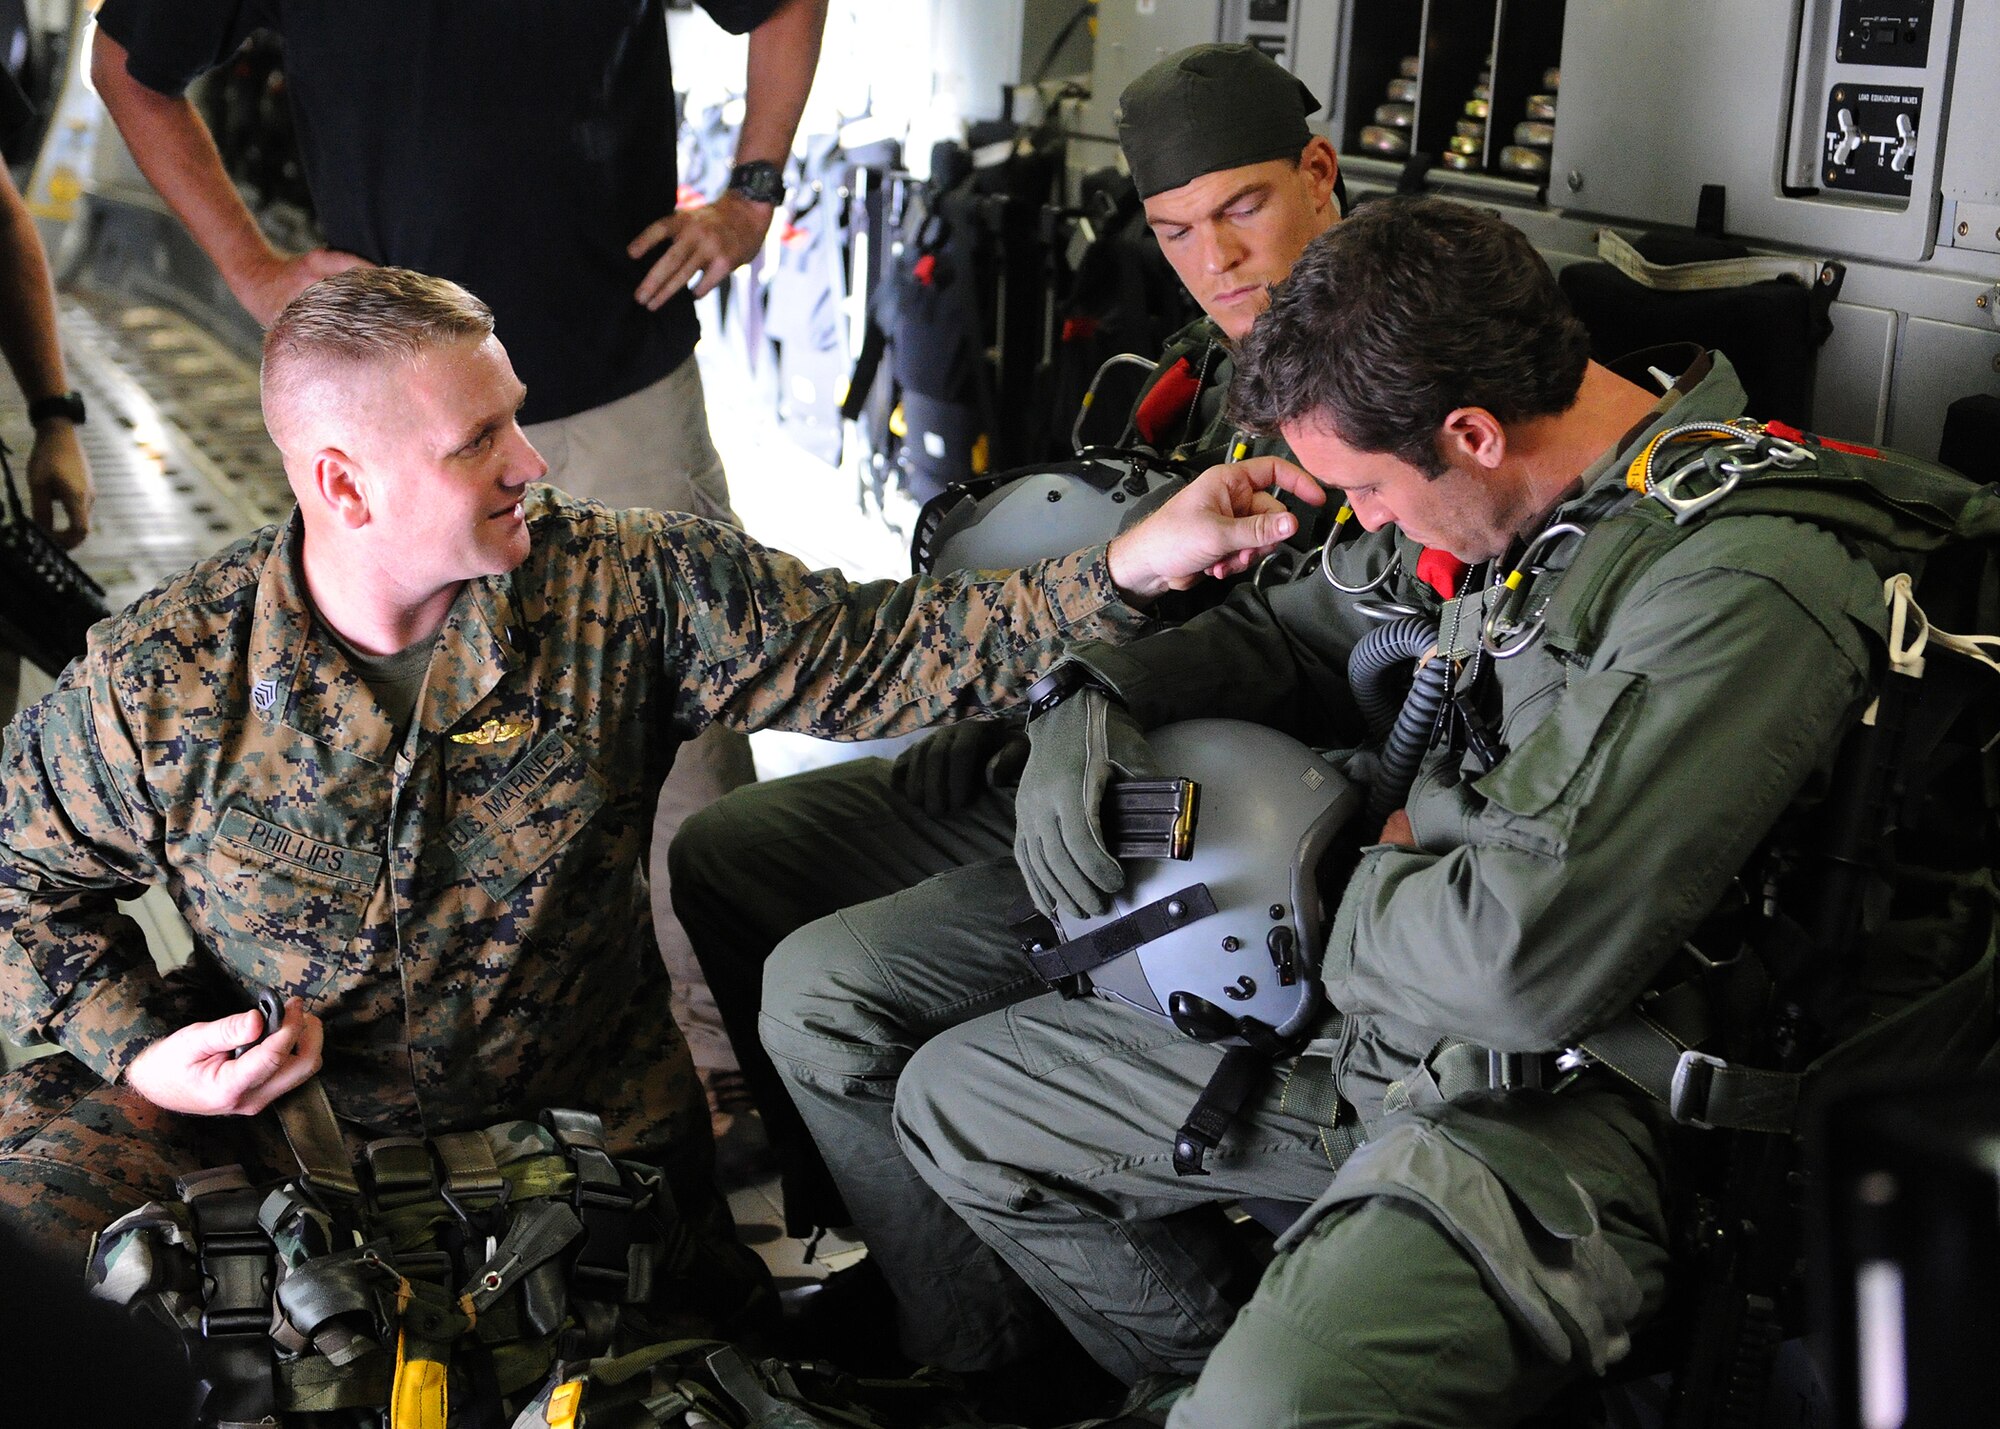 U.S. Marine Corps SSGT John Phillips, Special Operations Command, Pacific, parachute rigger, helps “Hawaii Five-0,” actors Alex O’Loughlin (right) and Alan Ritchson (center) adjust their parachute straps aboard a C-17 Globemaster at Joint Base Pearl Harbor-Hickam, Feb. 21, 2013.  The crew and cast were on scene to shoot a portion of an upcoming episode. (U.S. Air Force photo/Tech. Sgt. Jerome S. Tayborn)